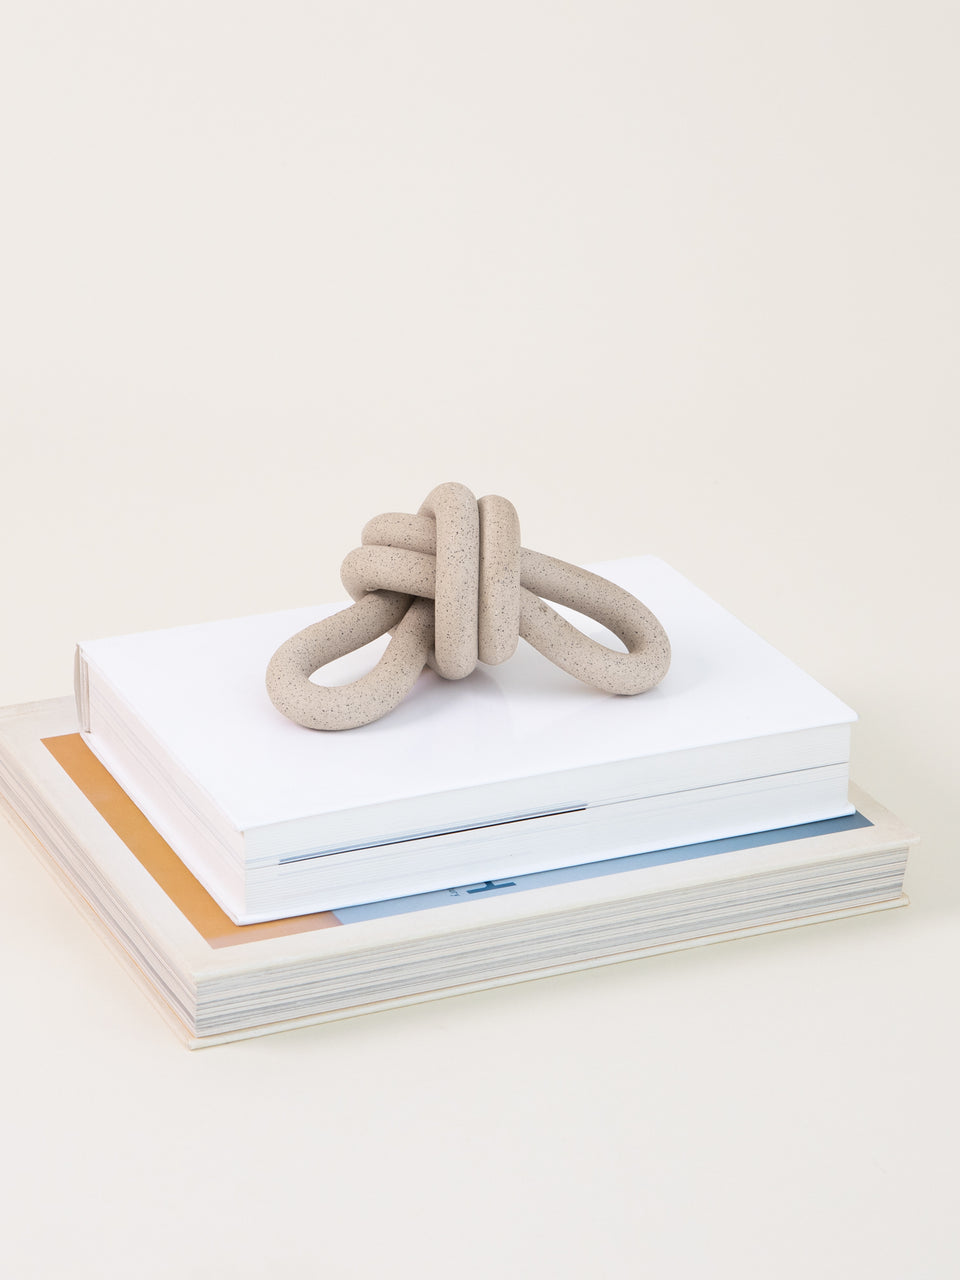 Double Loop Knot, Sand: SIN ceramics & home goods - Made in